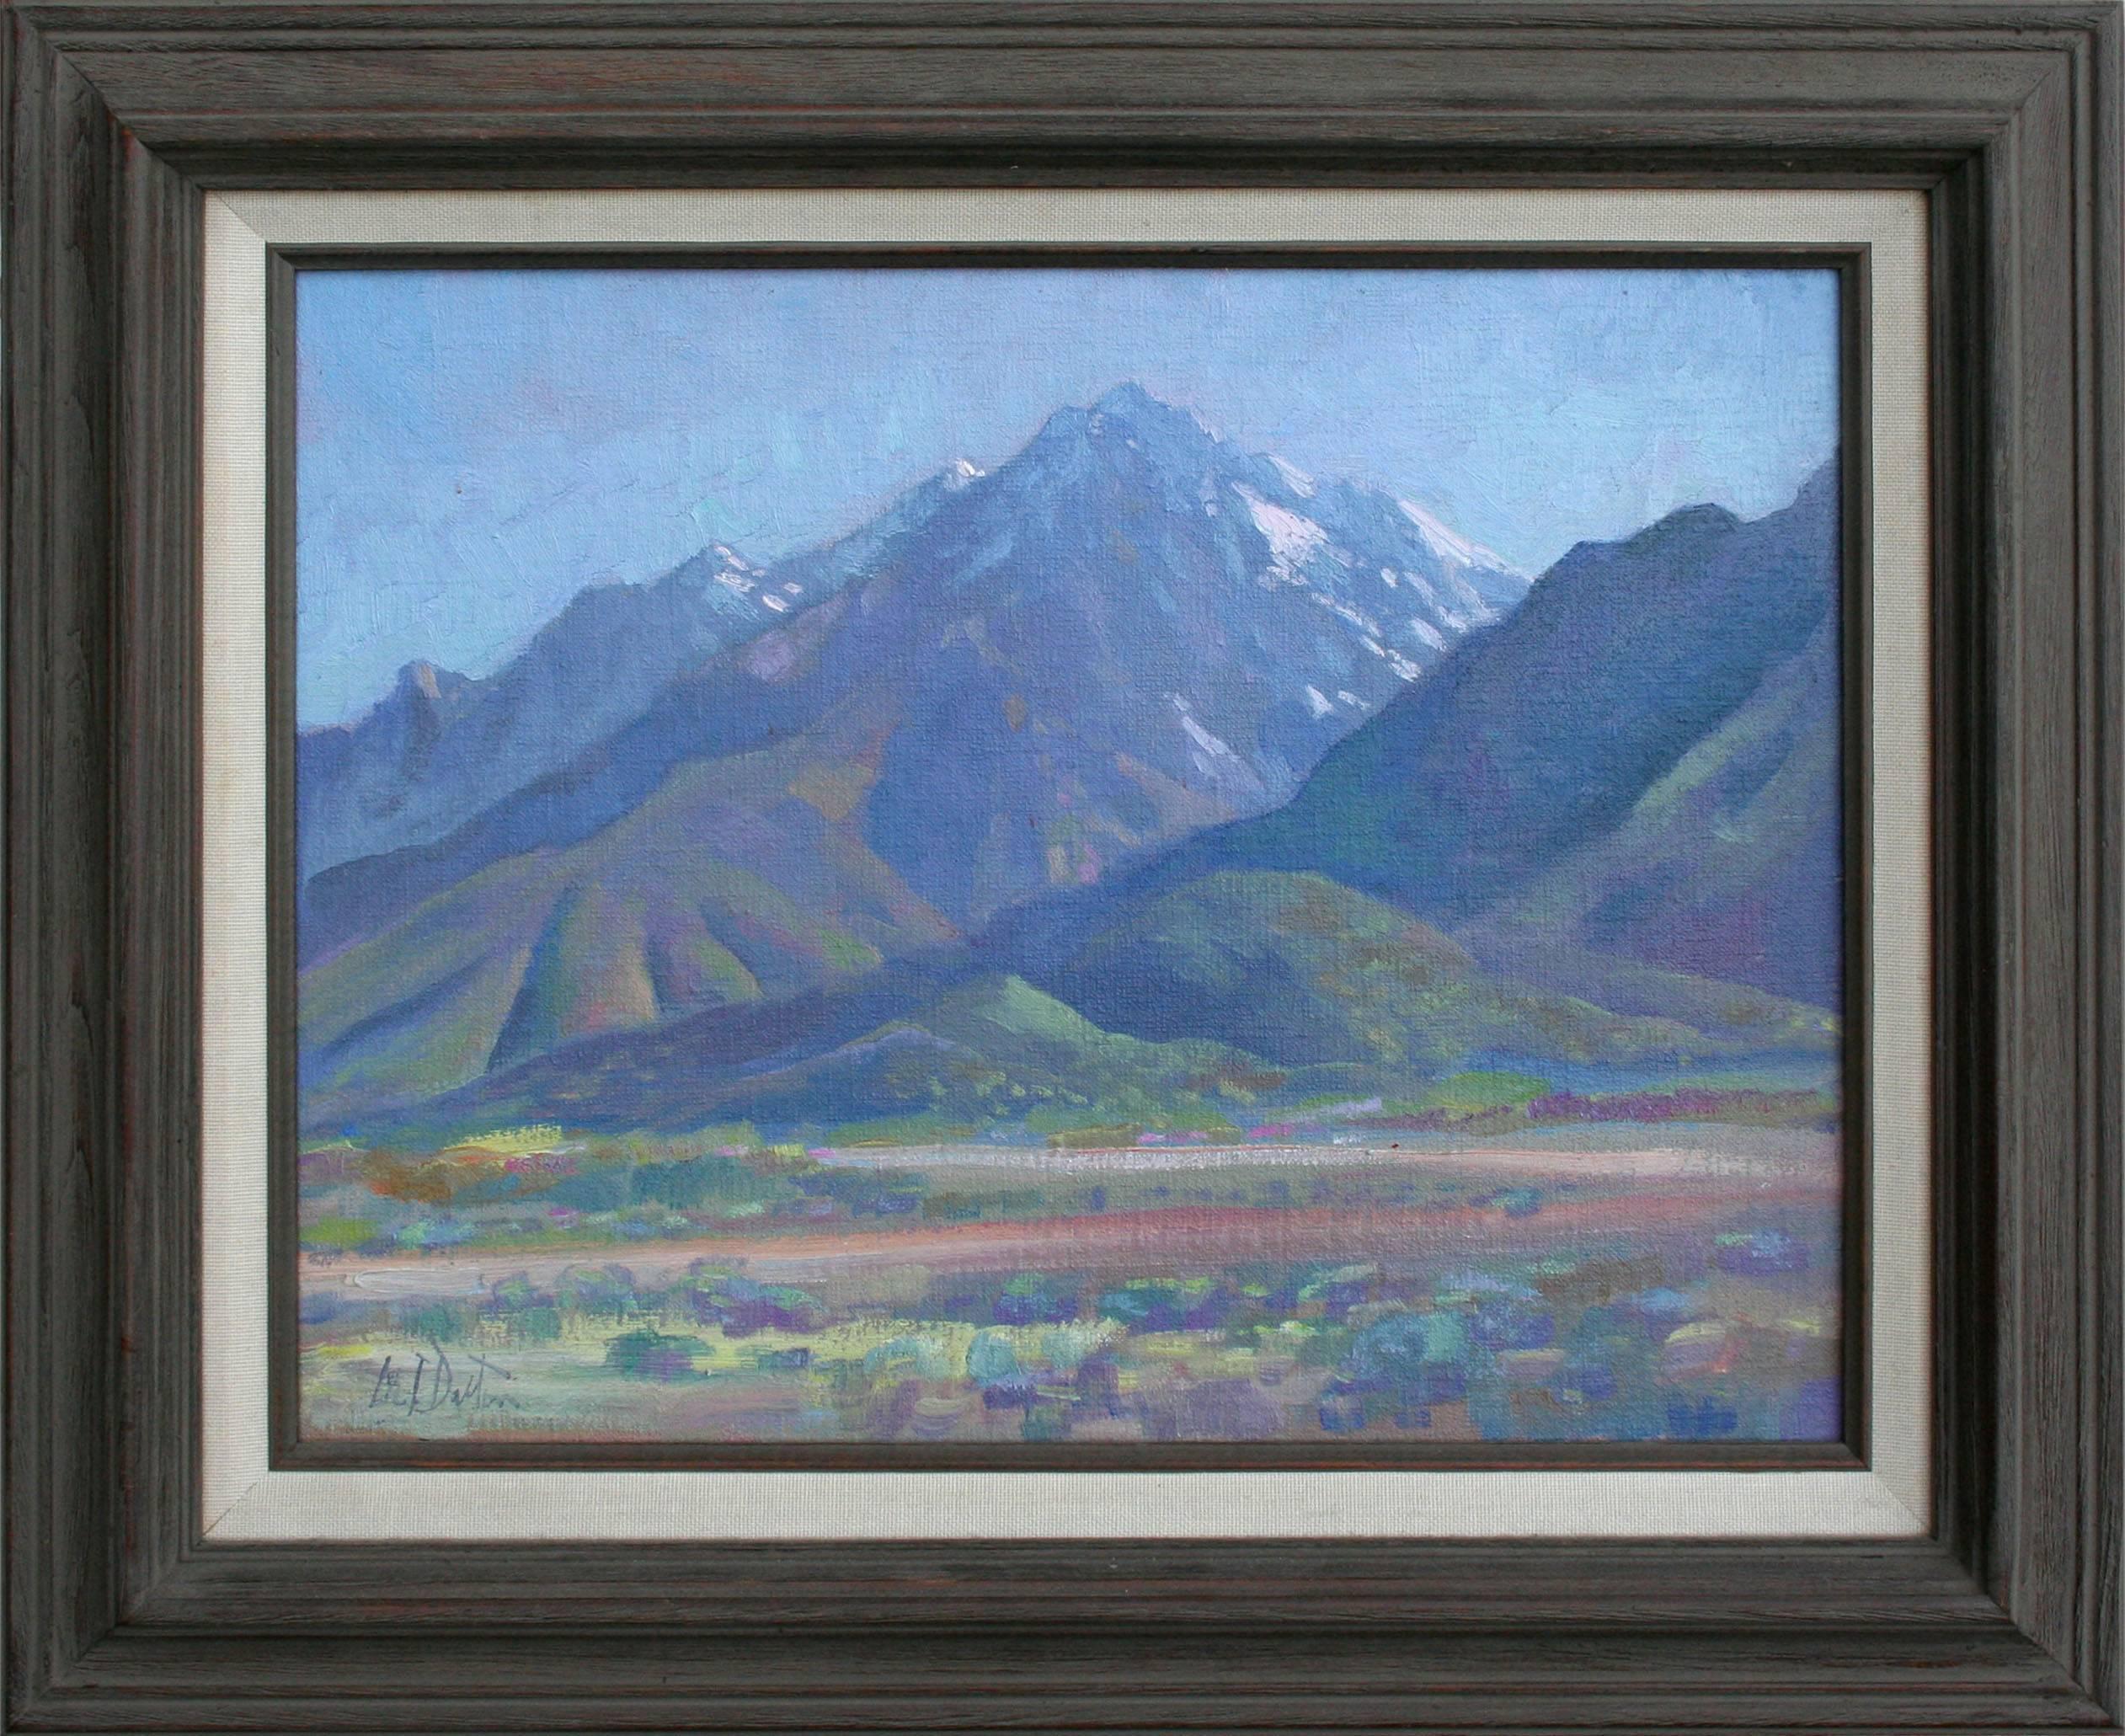 The Wasatch Mountains in Utah - Painting by Lee T. Dalton